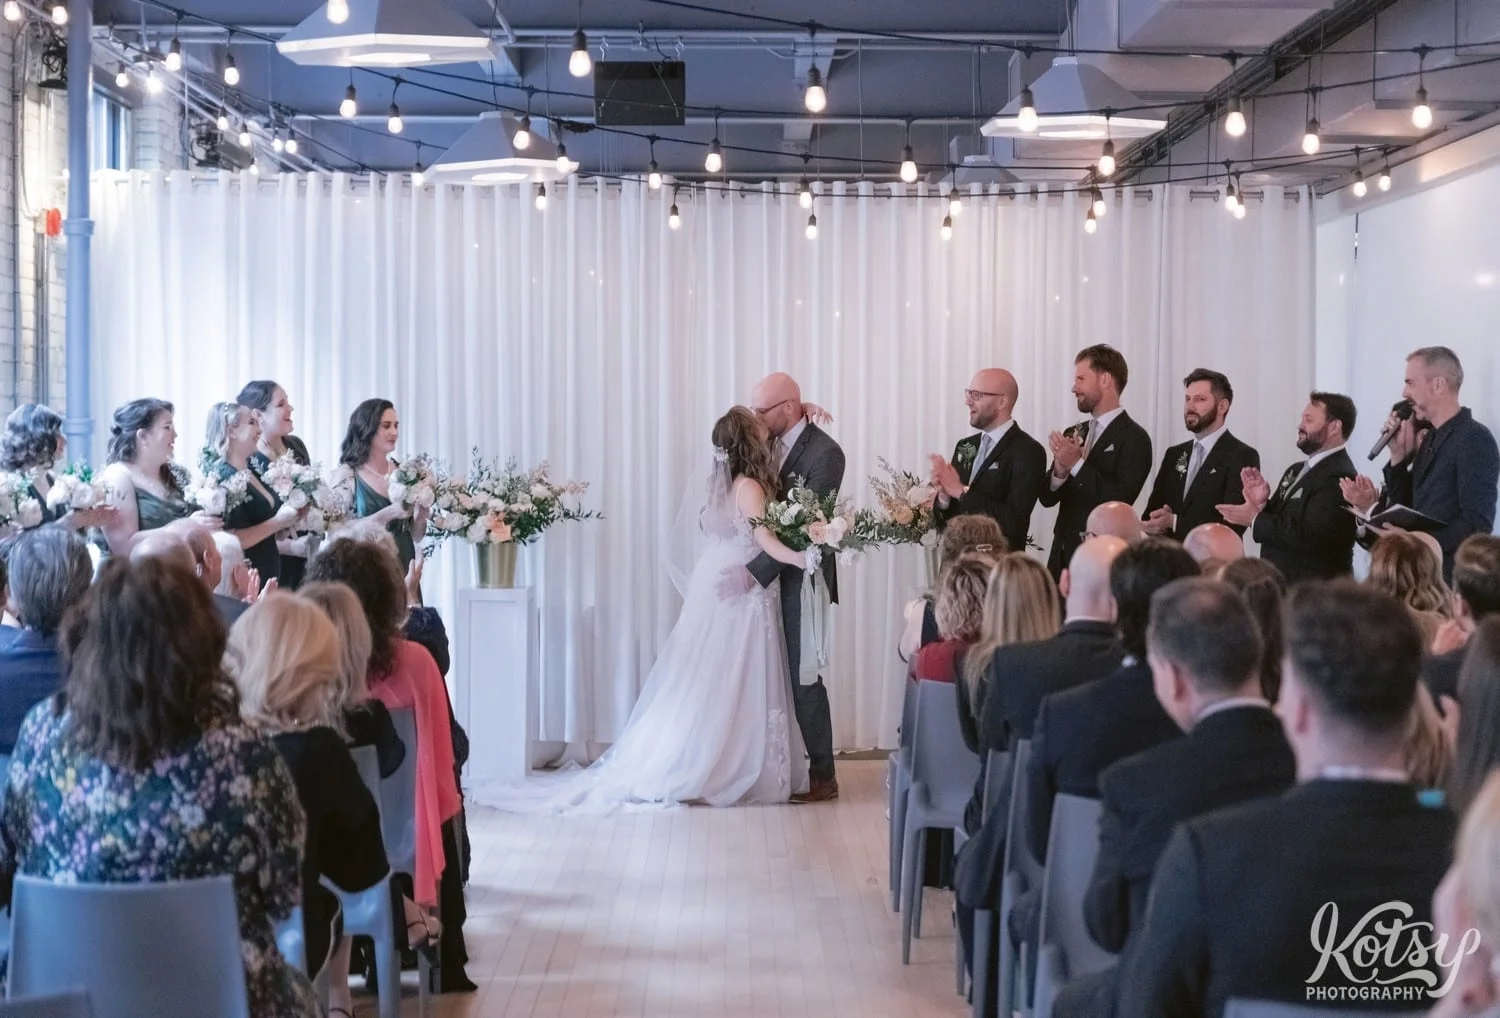 A bright and groom kiss at the altar in front of a room full of people and their wedding party during their Second Floor Events wedding ceremony in Toronto, Canada